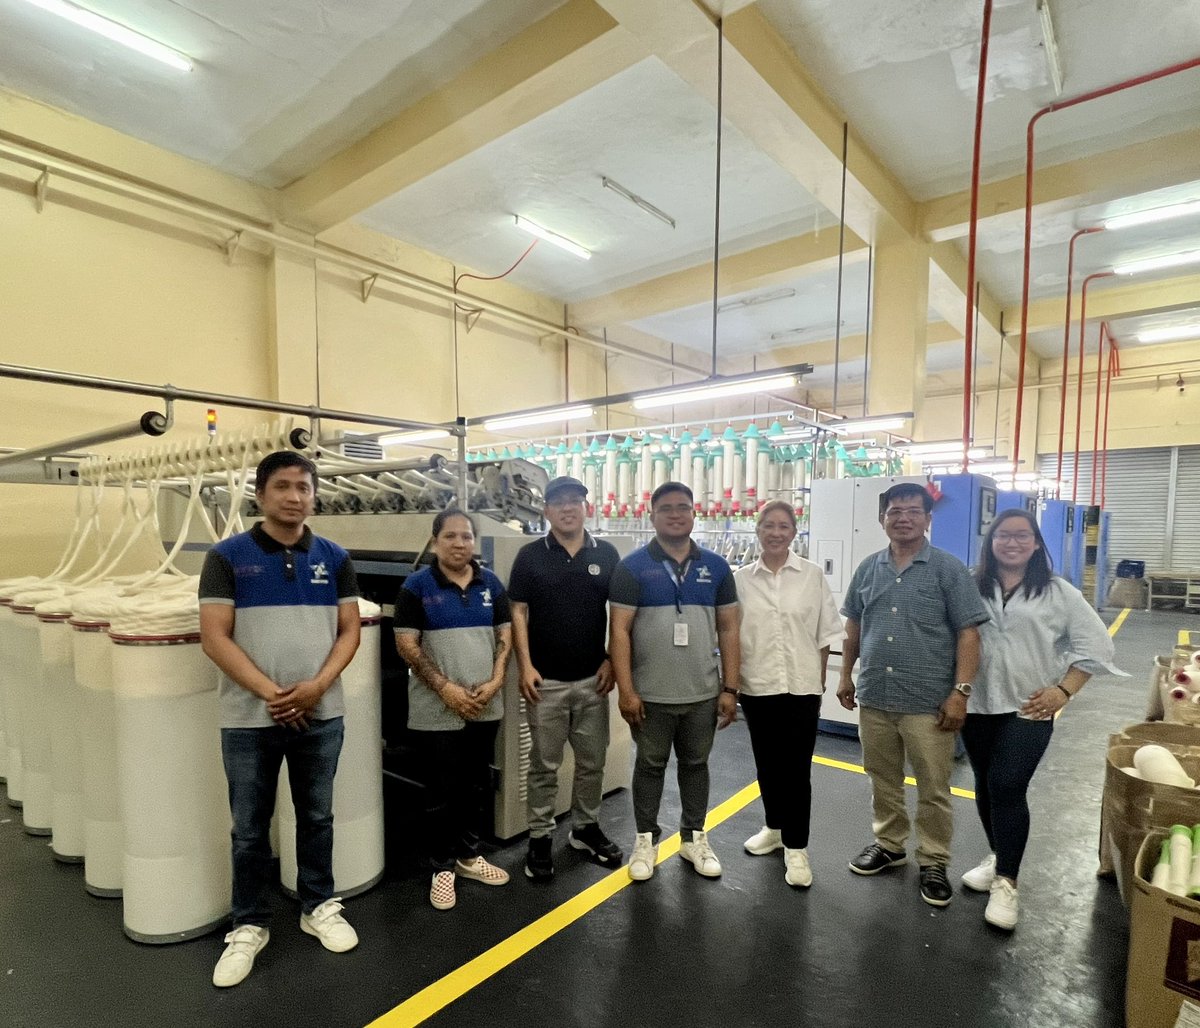 SUSTAINABLE TEXTILE for the 🇵🇭 Creative Industry #TatakPinoy #supplychain @UNIDO prepares to support the @DOSTphl Regional Yarn Production & Innovation Center (RYPIC) in the value-chain entry of cotton-banana & cotton-pineapple hybrid yarns. #standards #laboratory @UNIDO_ASP